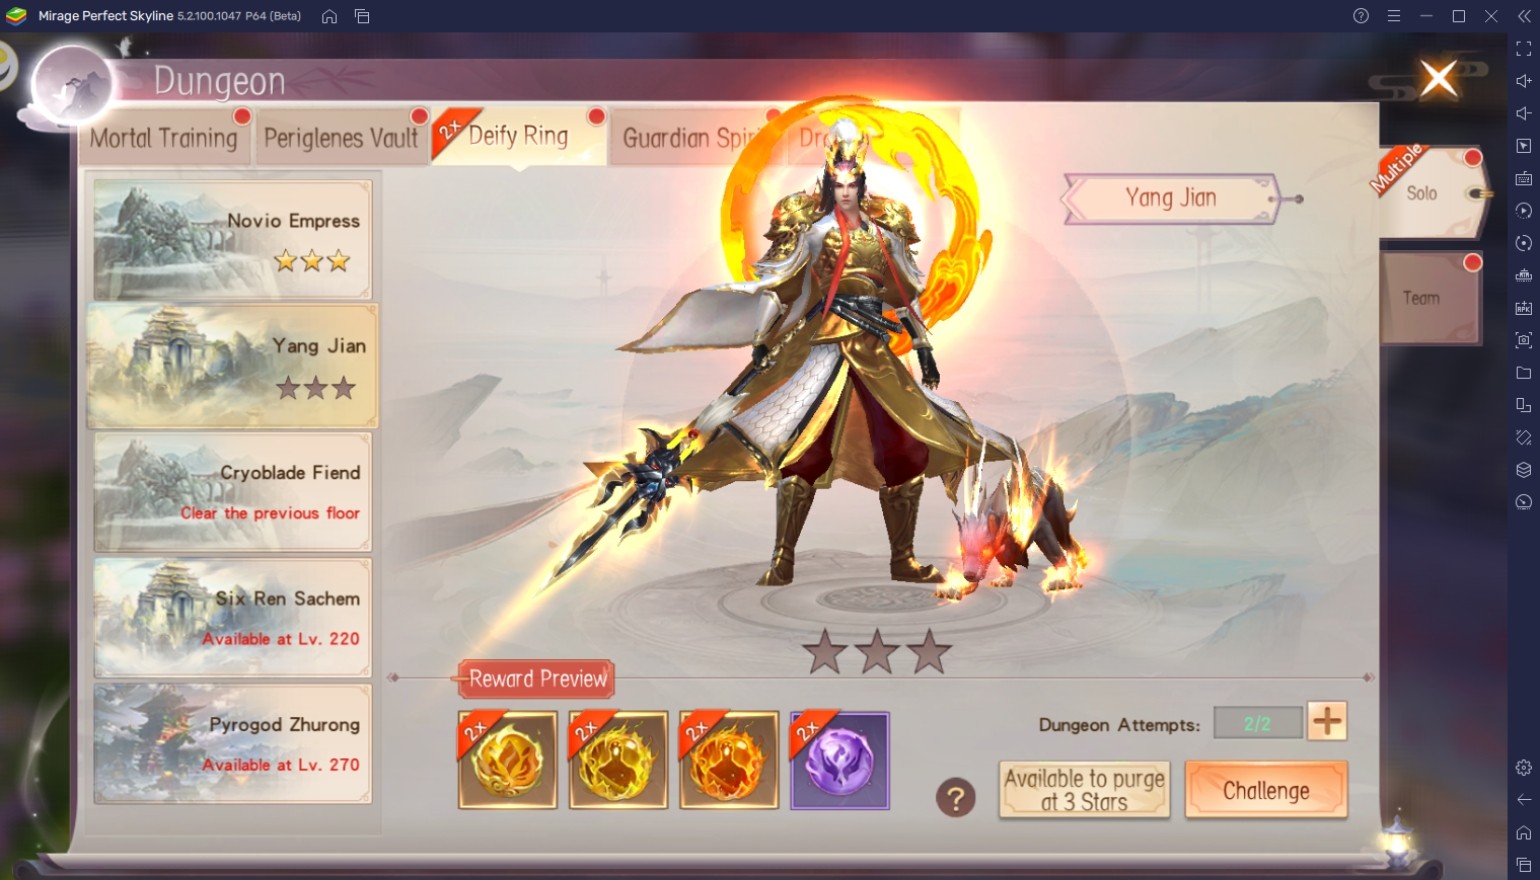 BlueStacks' Beginners Guide to Playing Mirage: Perfect Skyline